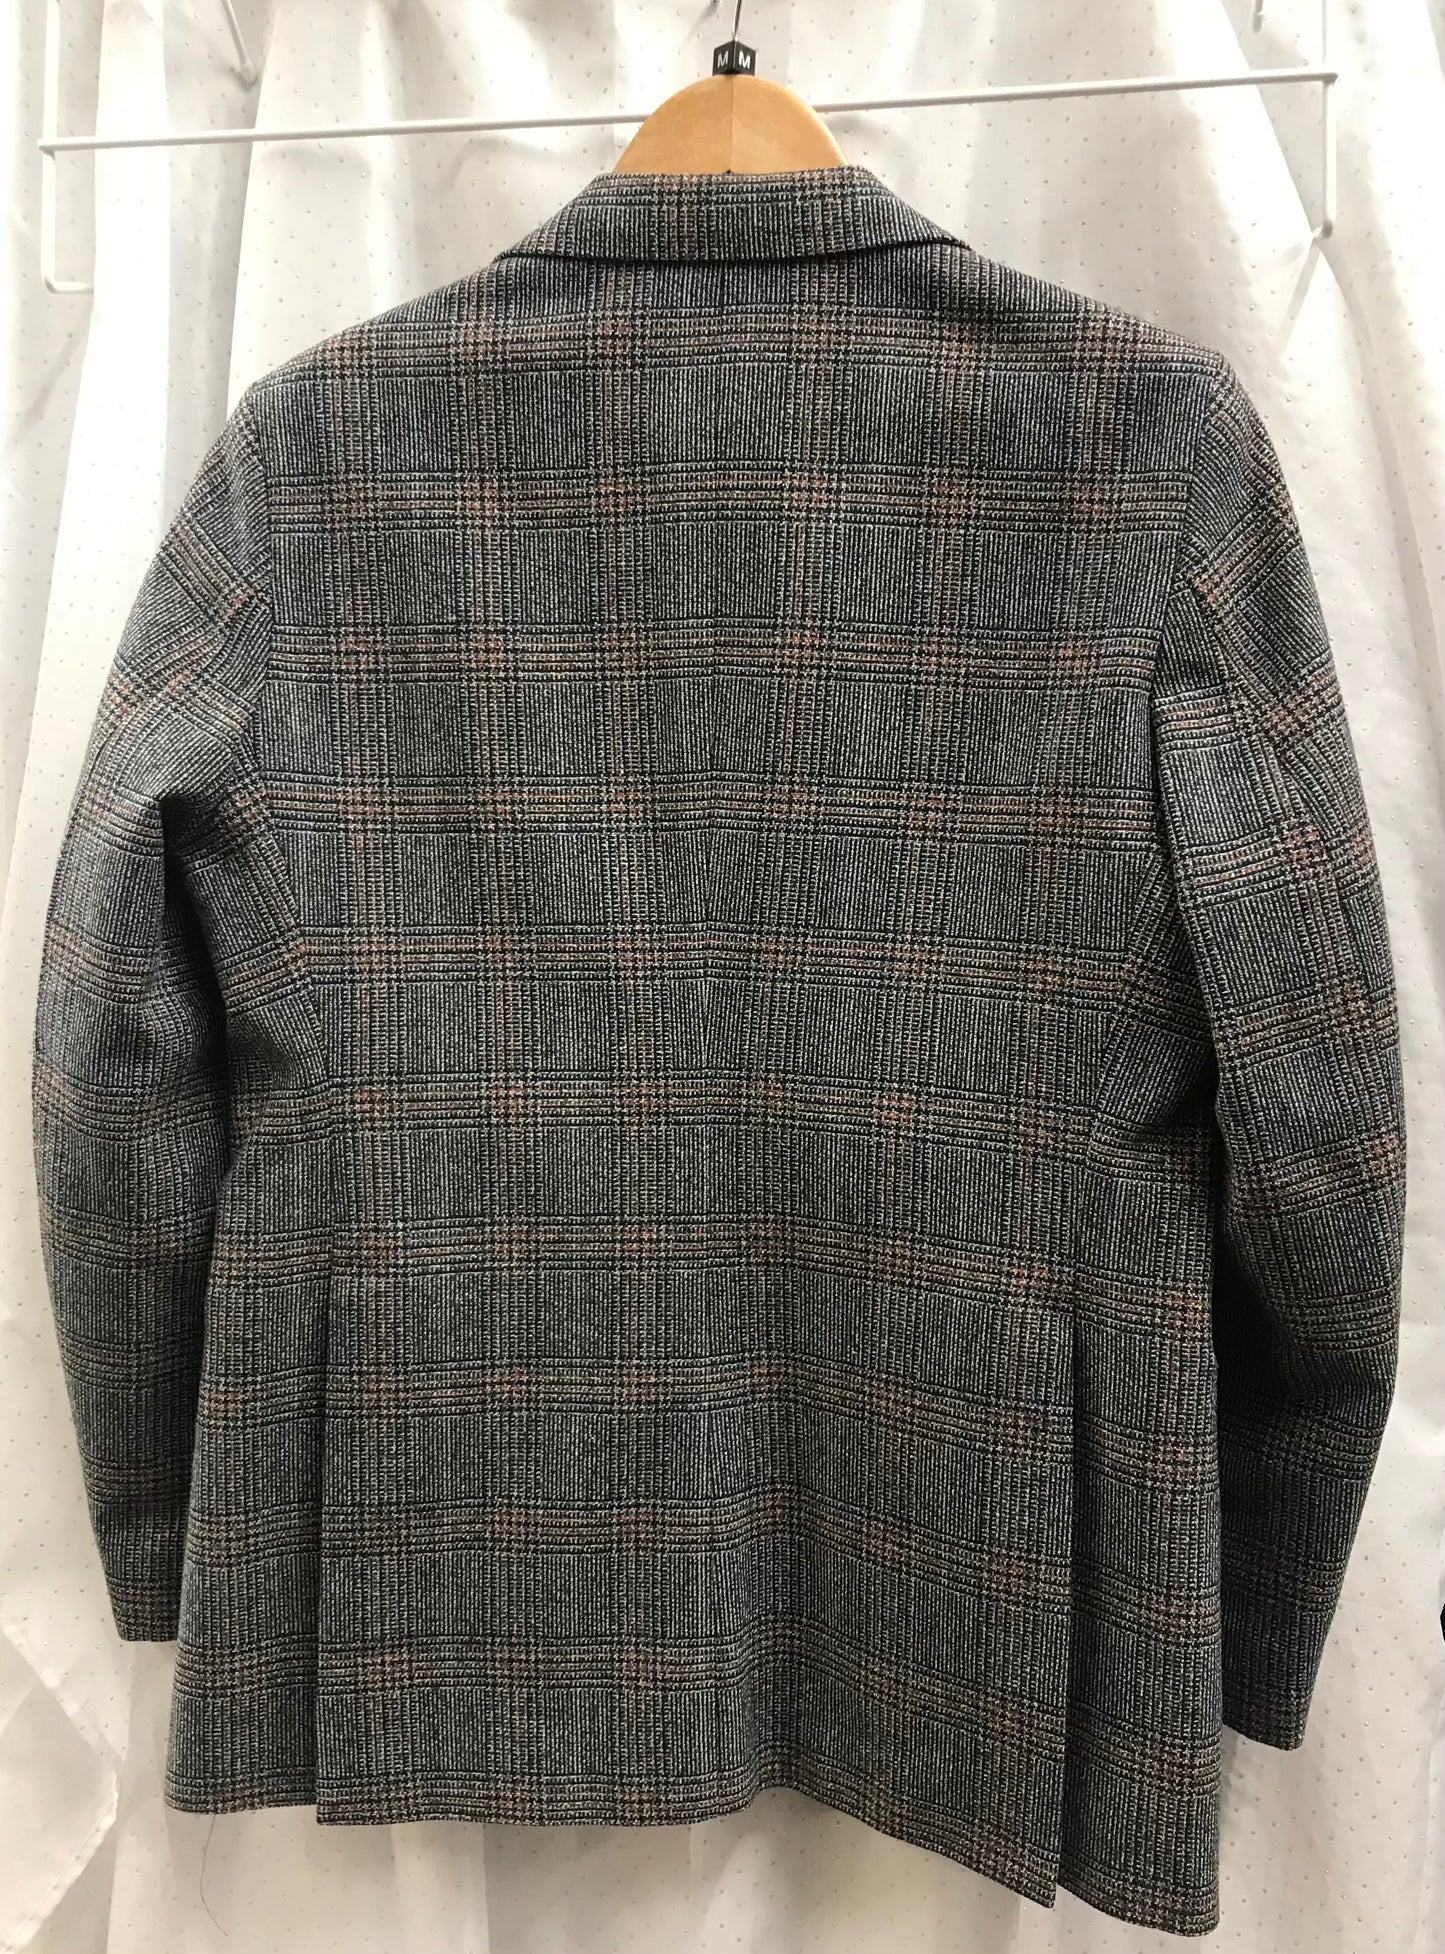 Thornproof Twist Tweed Grey with Coloured Check 40inch Chest Jacket